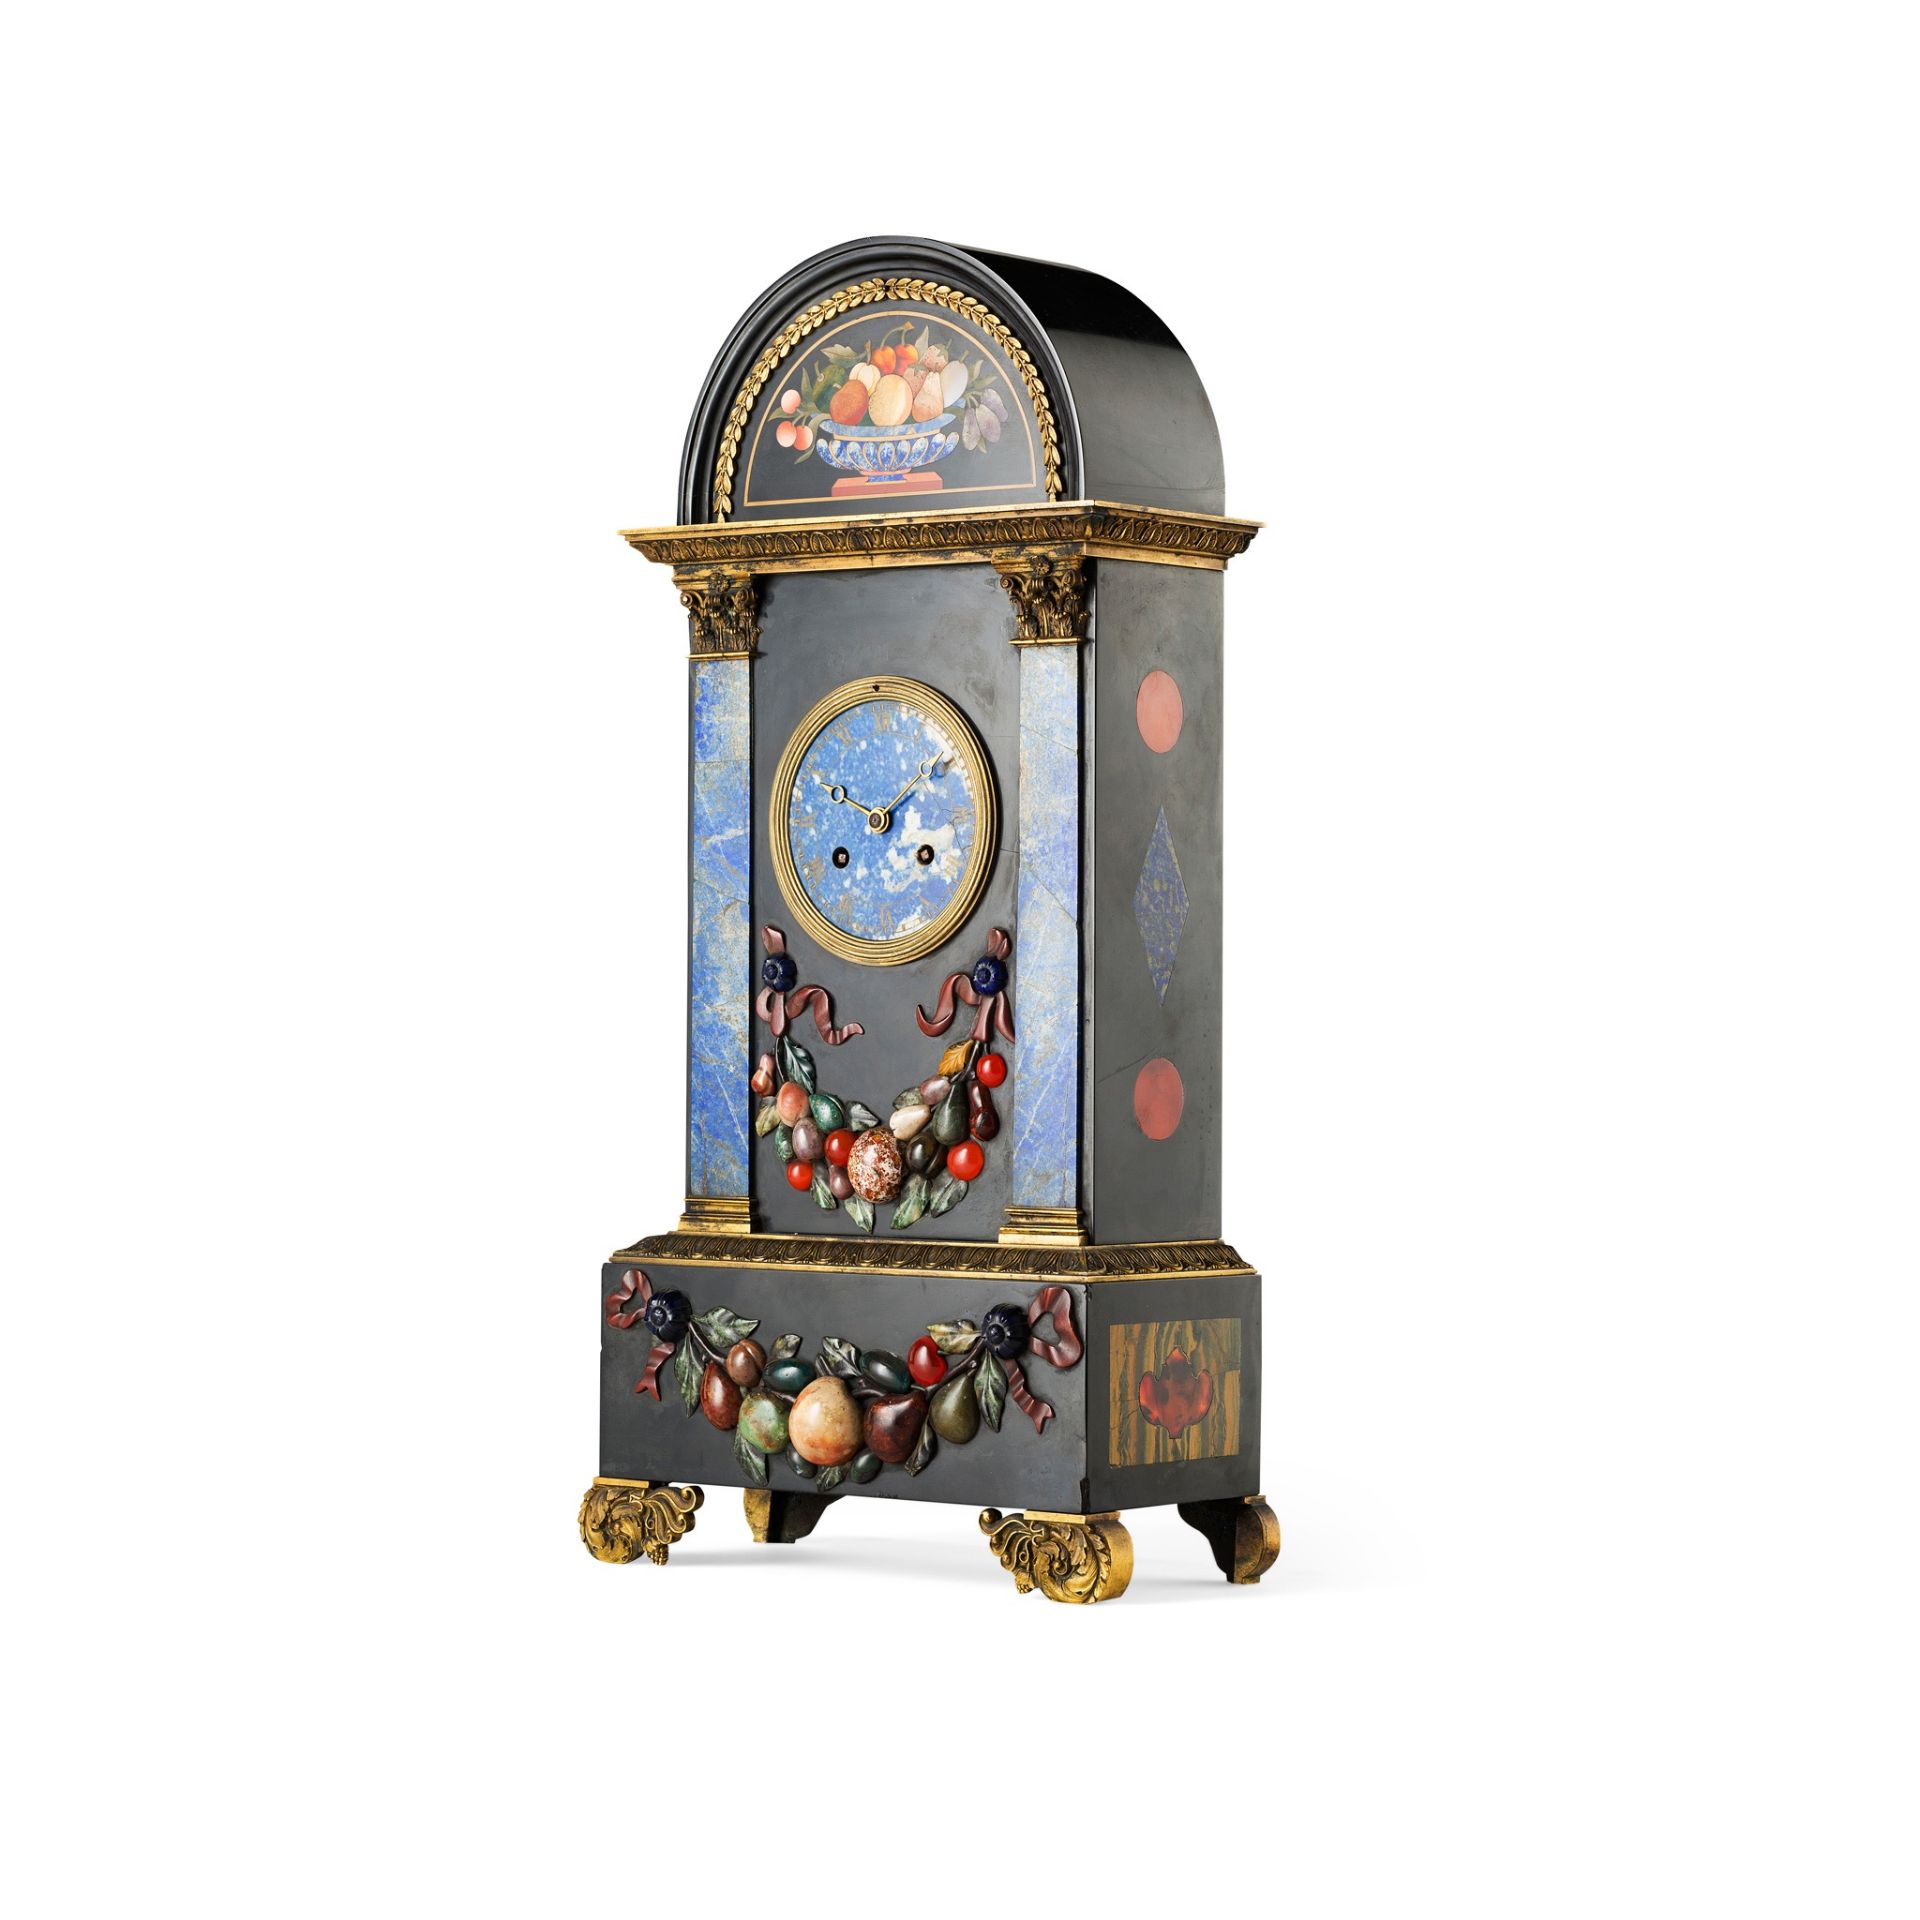 FRENCH FLORENTINE MARBLE AND PIETRA DURA MANTEL CLOCK, BY HUNZIKER, PARIS EARLY 19TH CENTURY - Image 3 of 3